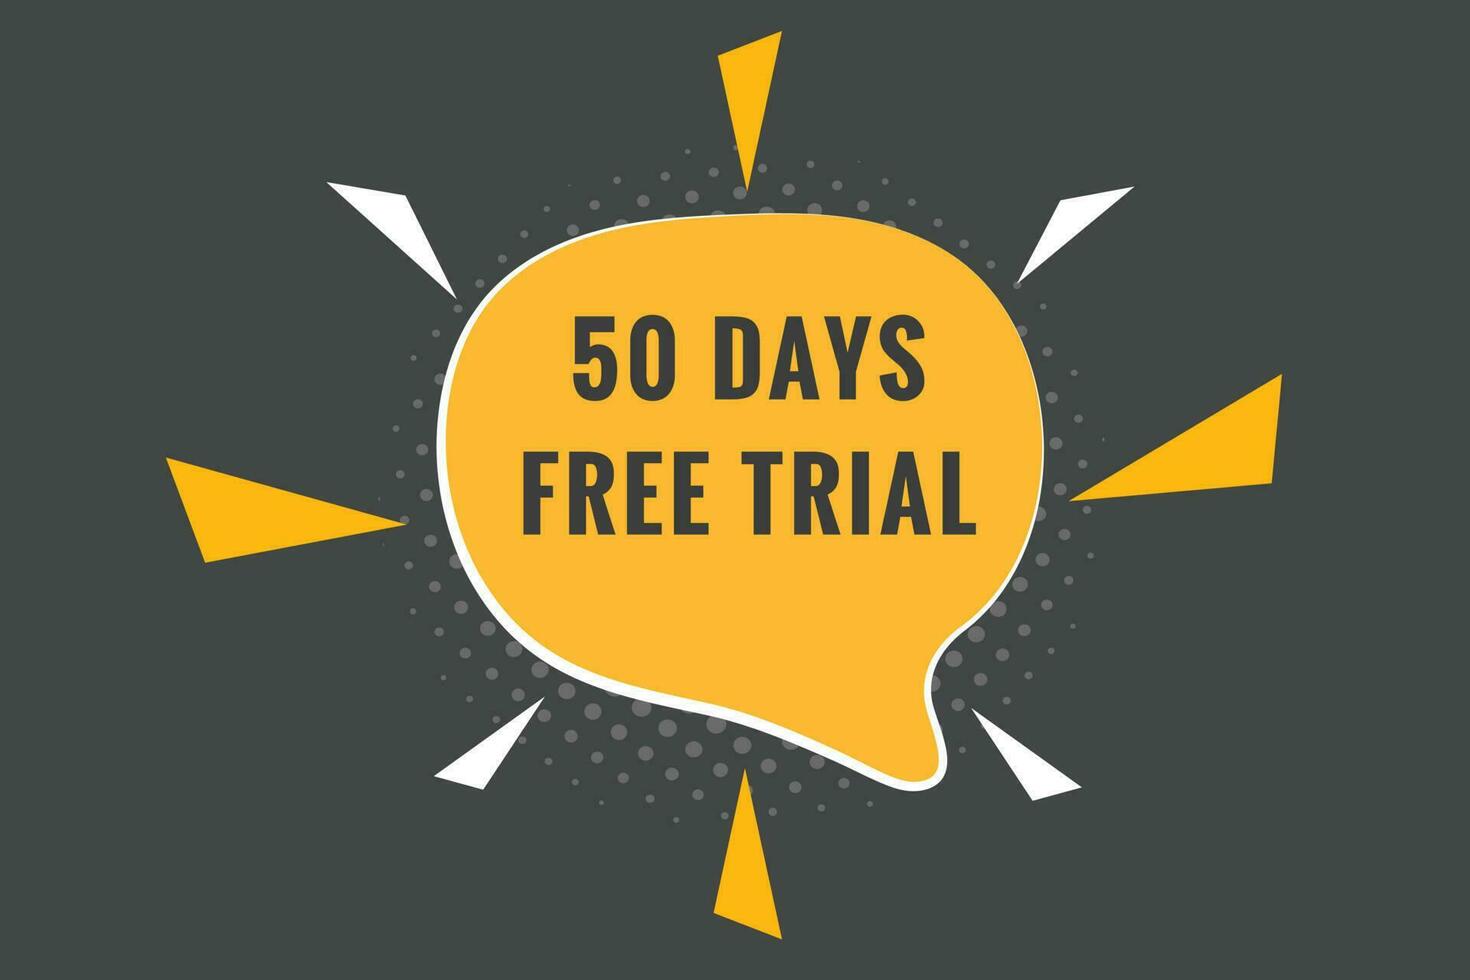 50 days Free trial Banner Design. 50 day free banner background vector